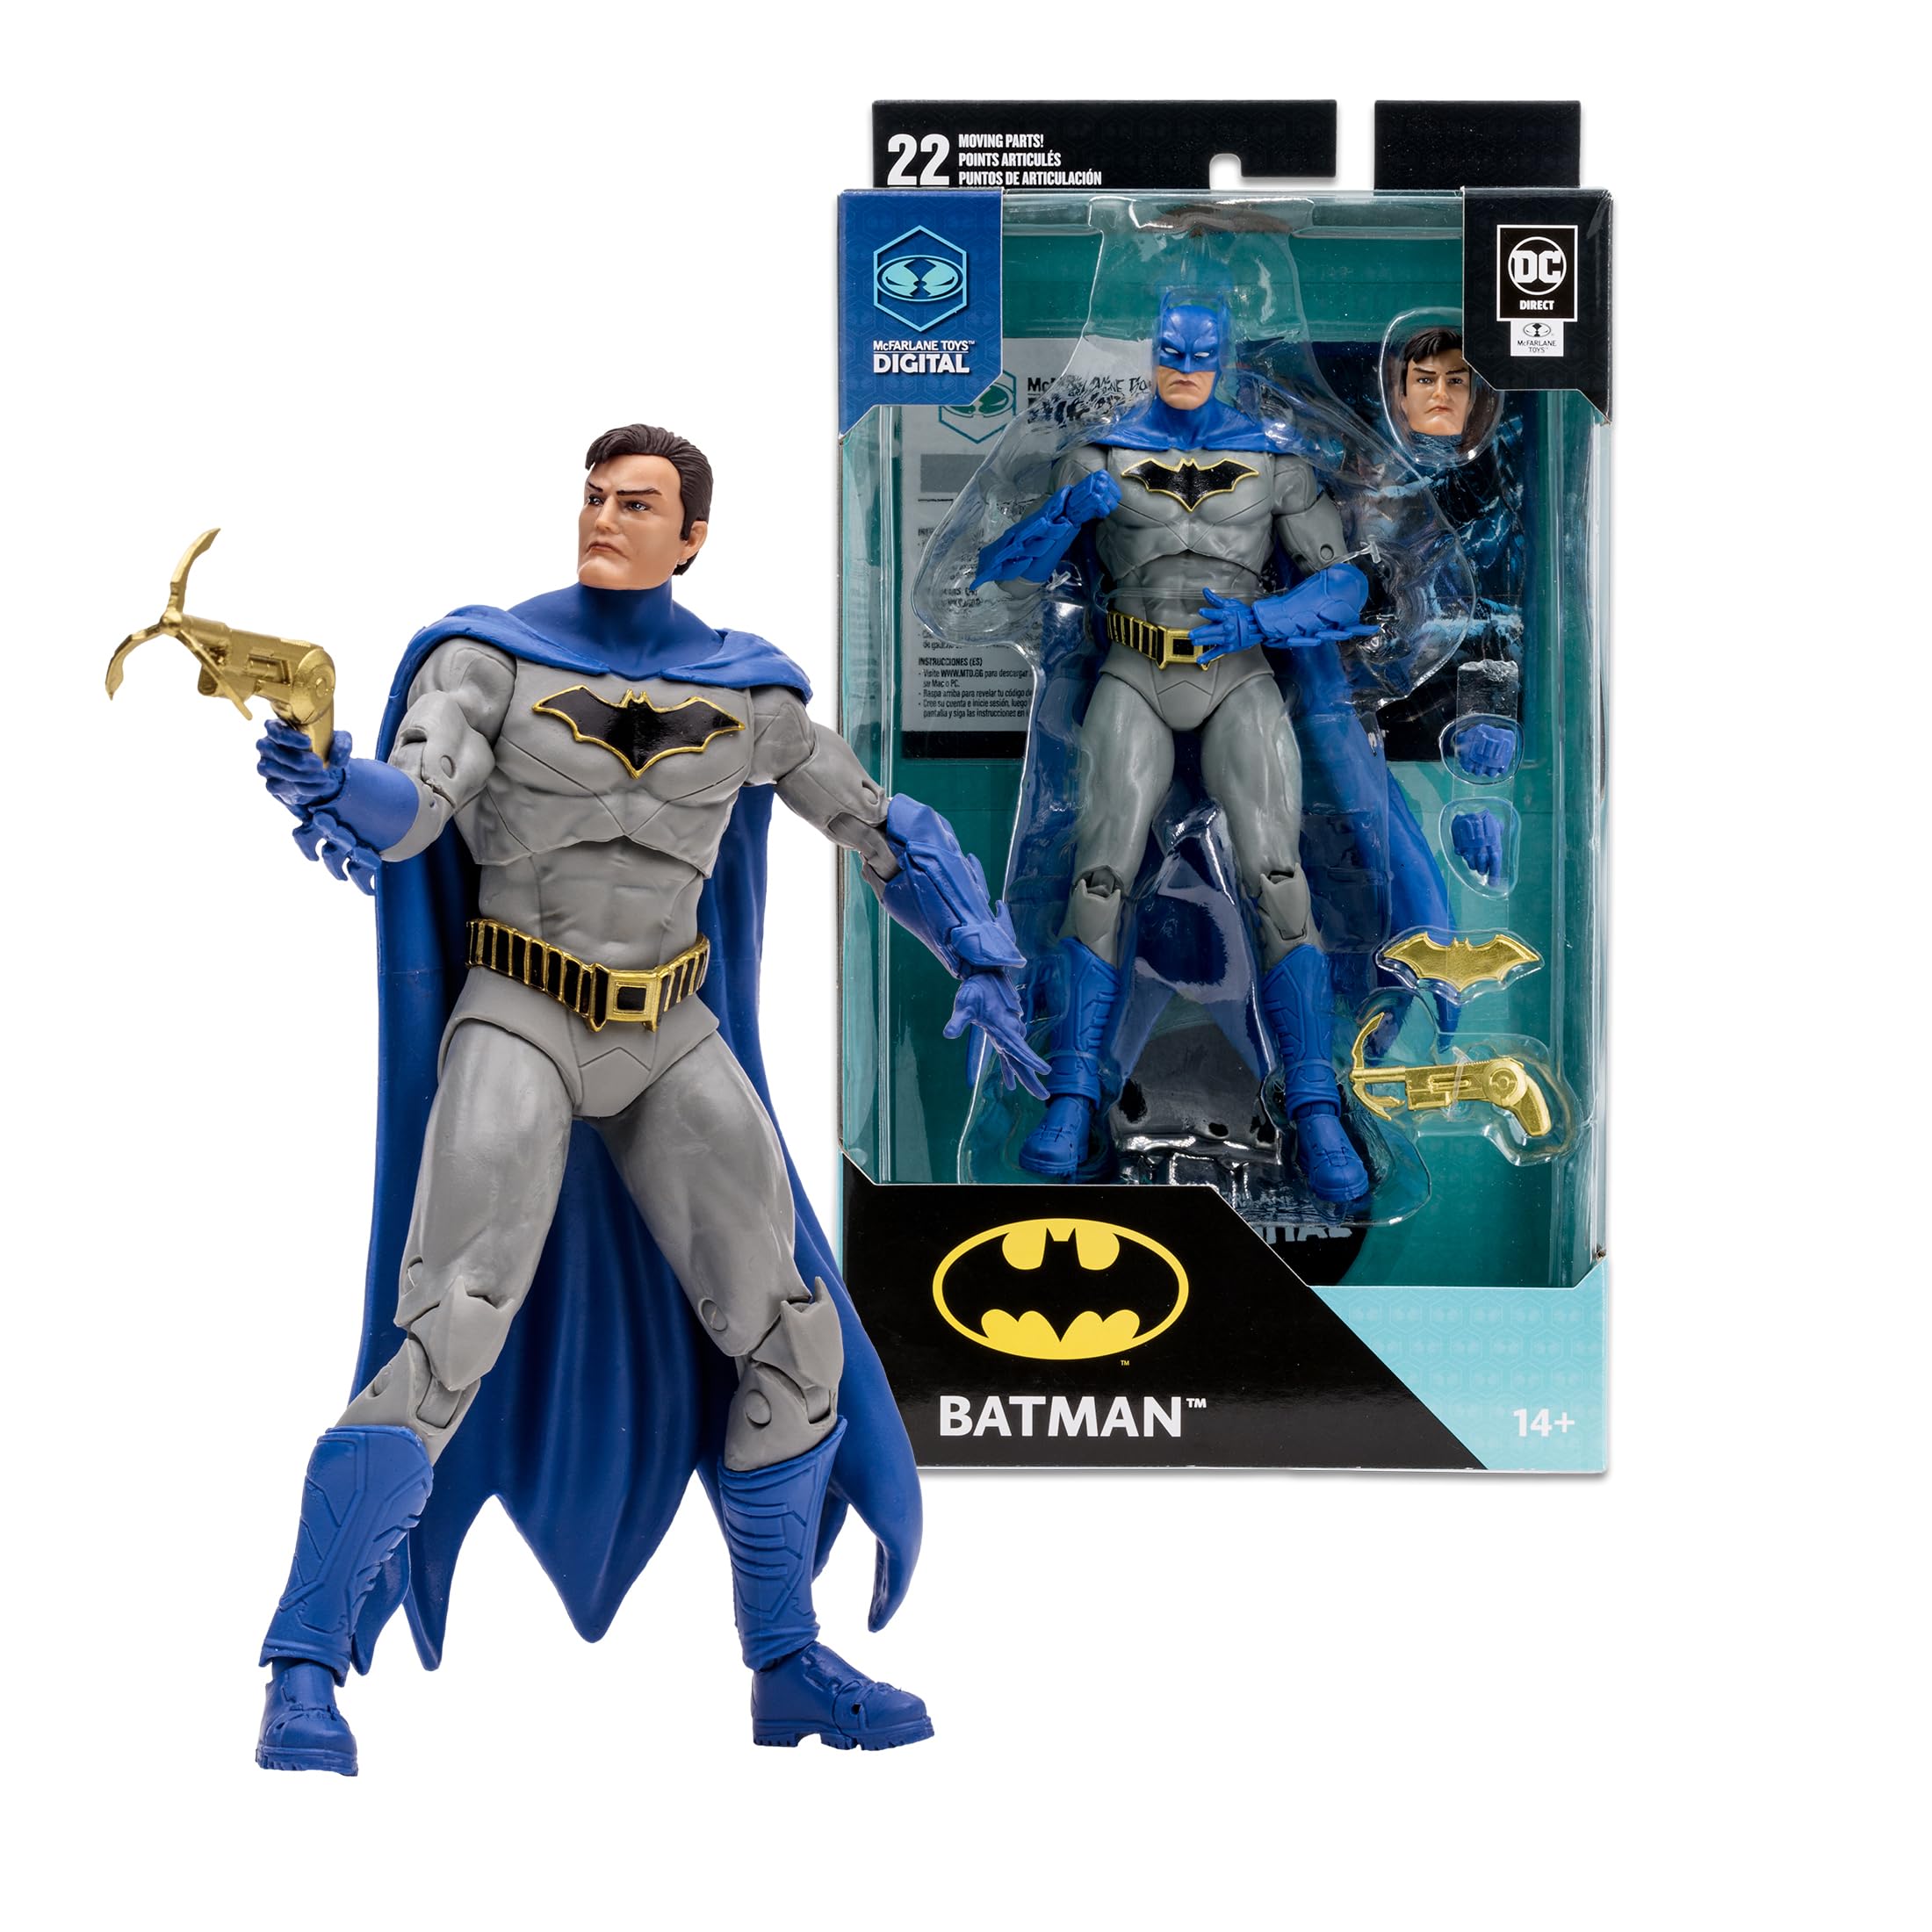 McFarlane Toys - DC Direct Batman (DC Rebirth) 7in Action Figure with Digital Collectible